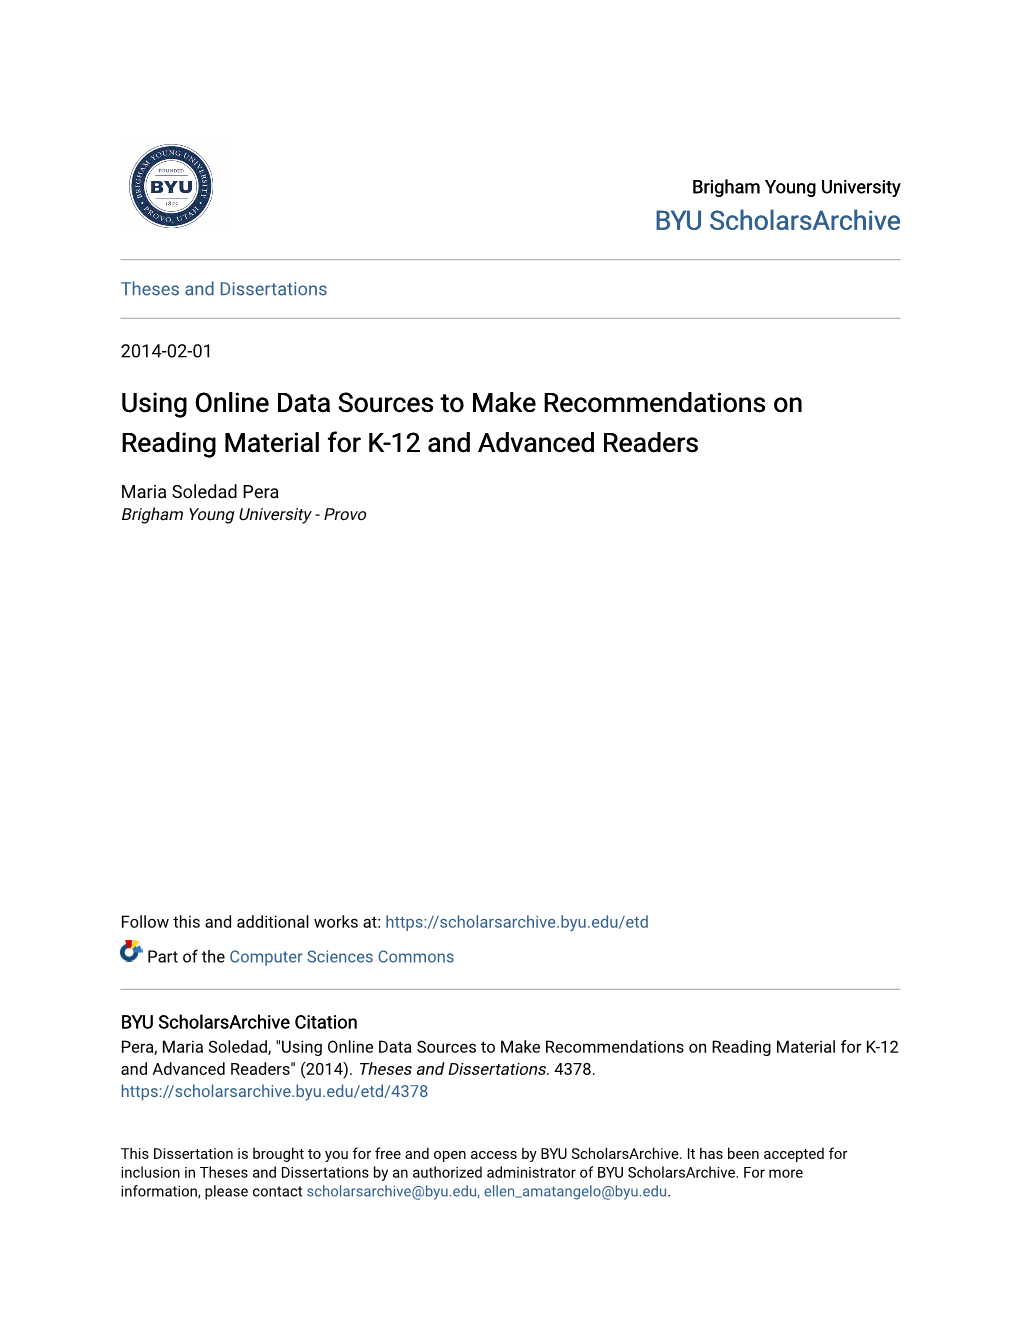 Using Online Data Sources to Make Recommendations on Reading Material for K-12 and Advanced Readers